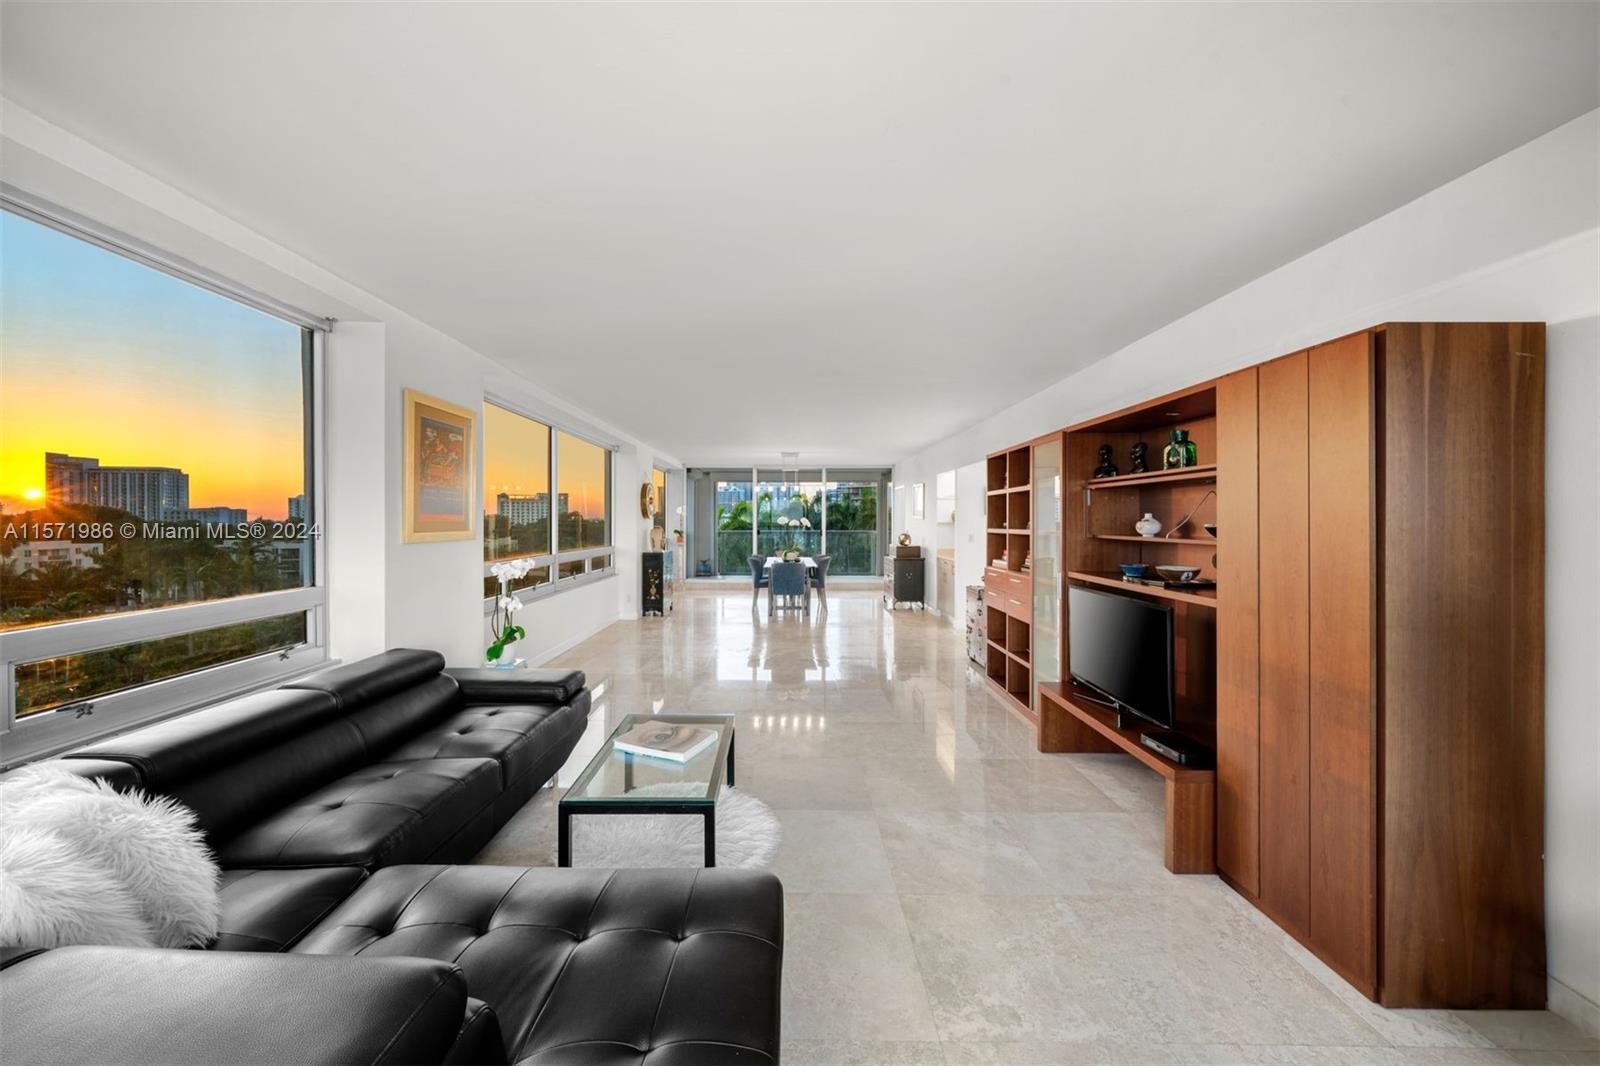 This coveted 01 Line 2/2 at the Palace Brickell showcases dynamic 8th floor Bay & Skyline views. Modern 2022 renovated kitchen features vibrant cityscape views. Amazing Bay views from primary bdrm w/updated bath. Step out to one of the 2 sleek balconies for beautiful sunrise & tranquil sunsets. Remote low-profile storm shutters for optimum protection/views. Semi-private elevator opens to 2-unit foyer. Arquitectonica staggered design ensures privacy & unobstructed views. 1 reserved parking w/extra space & EV charging. Valet parking, 24 hr concierge, gatehouse security, tennis, kids playroom, gym, party rm, BBQ deck & heated bayside pool/spa, bike storage & pkg reception. Easy access to dining, shops, Key Bisc, the Grove & Mia Bch. Special assessment paid by Seller. Budget includes reserves.